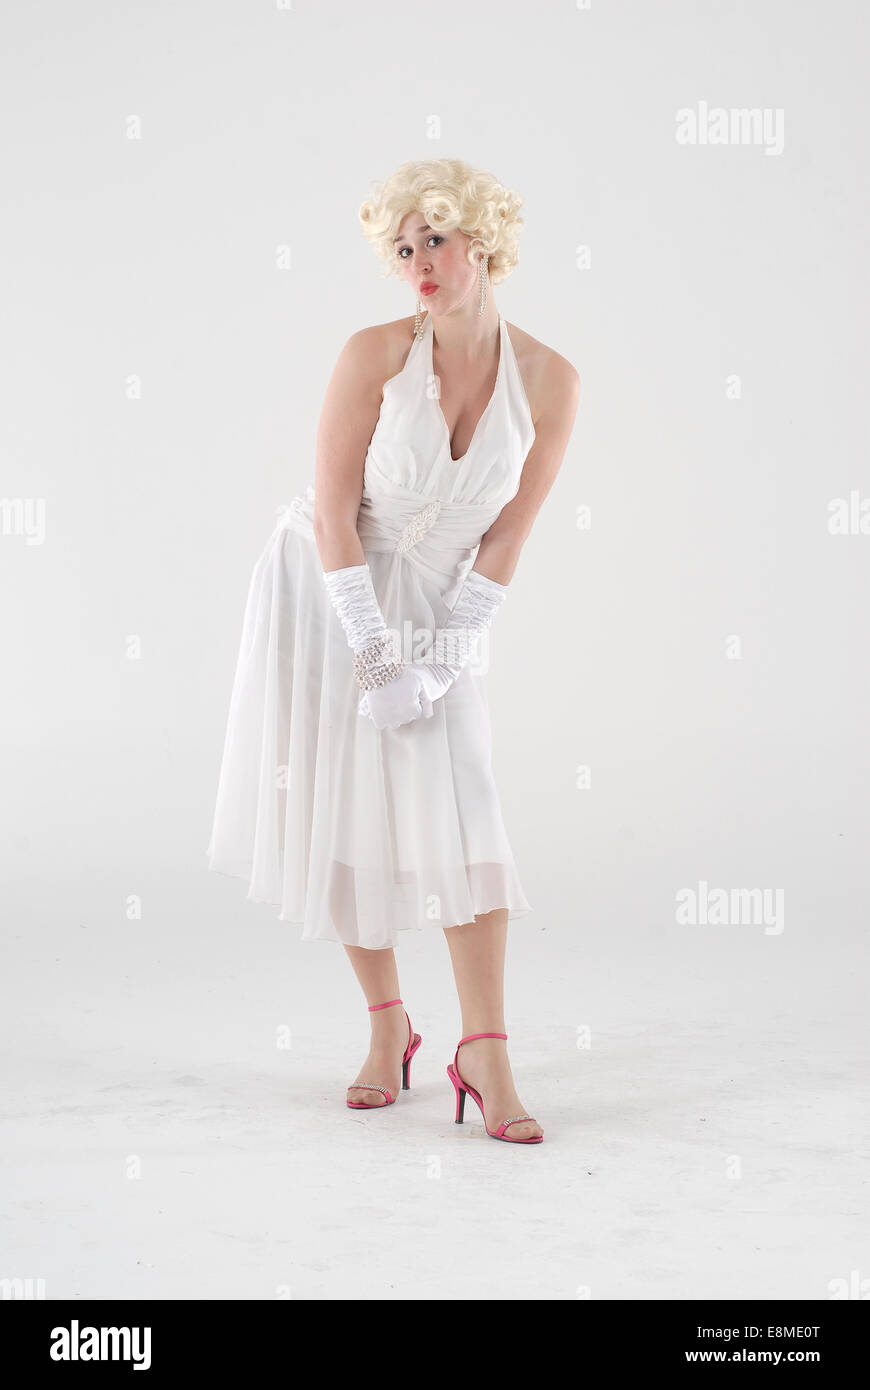 woman in fancy dress comedy costume in 1960s fashion and crazy funny outfit as marilyn monroe, with white dress and blond wig Stock Photo